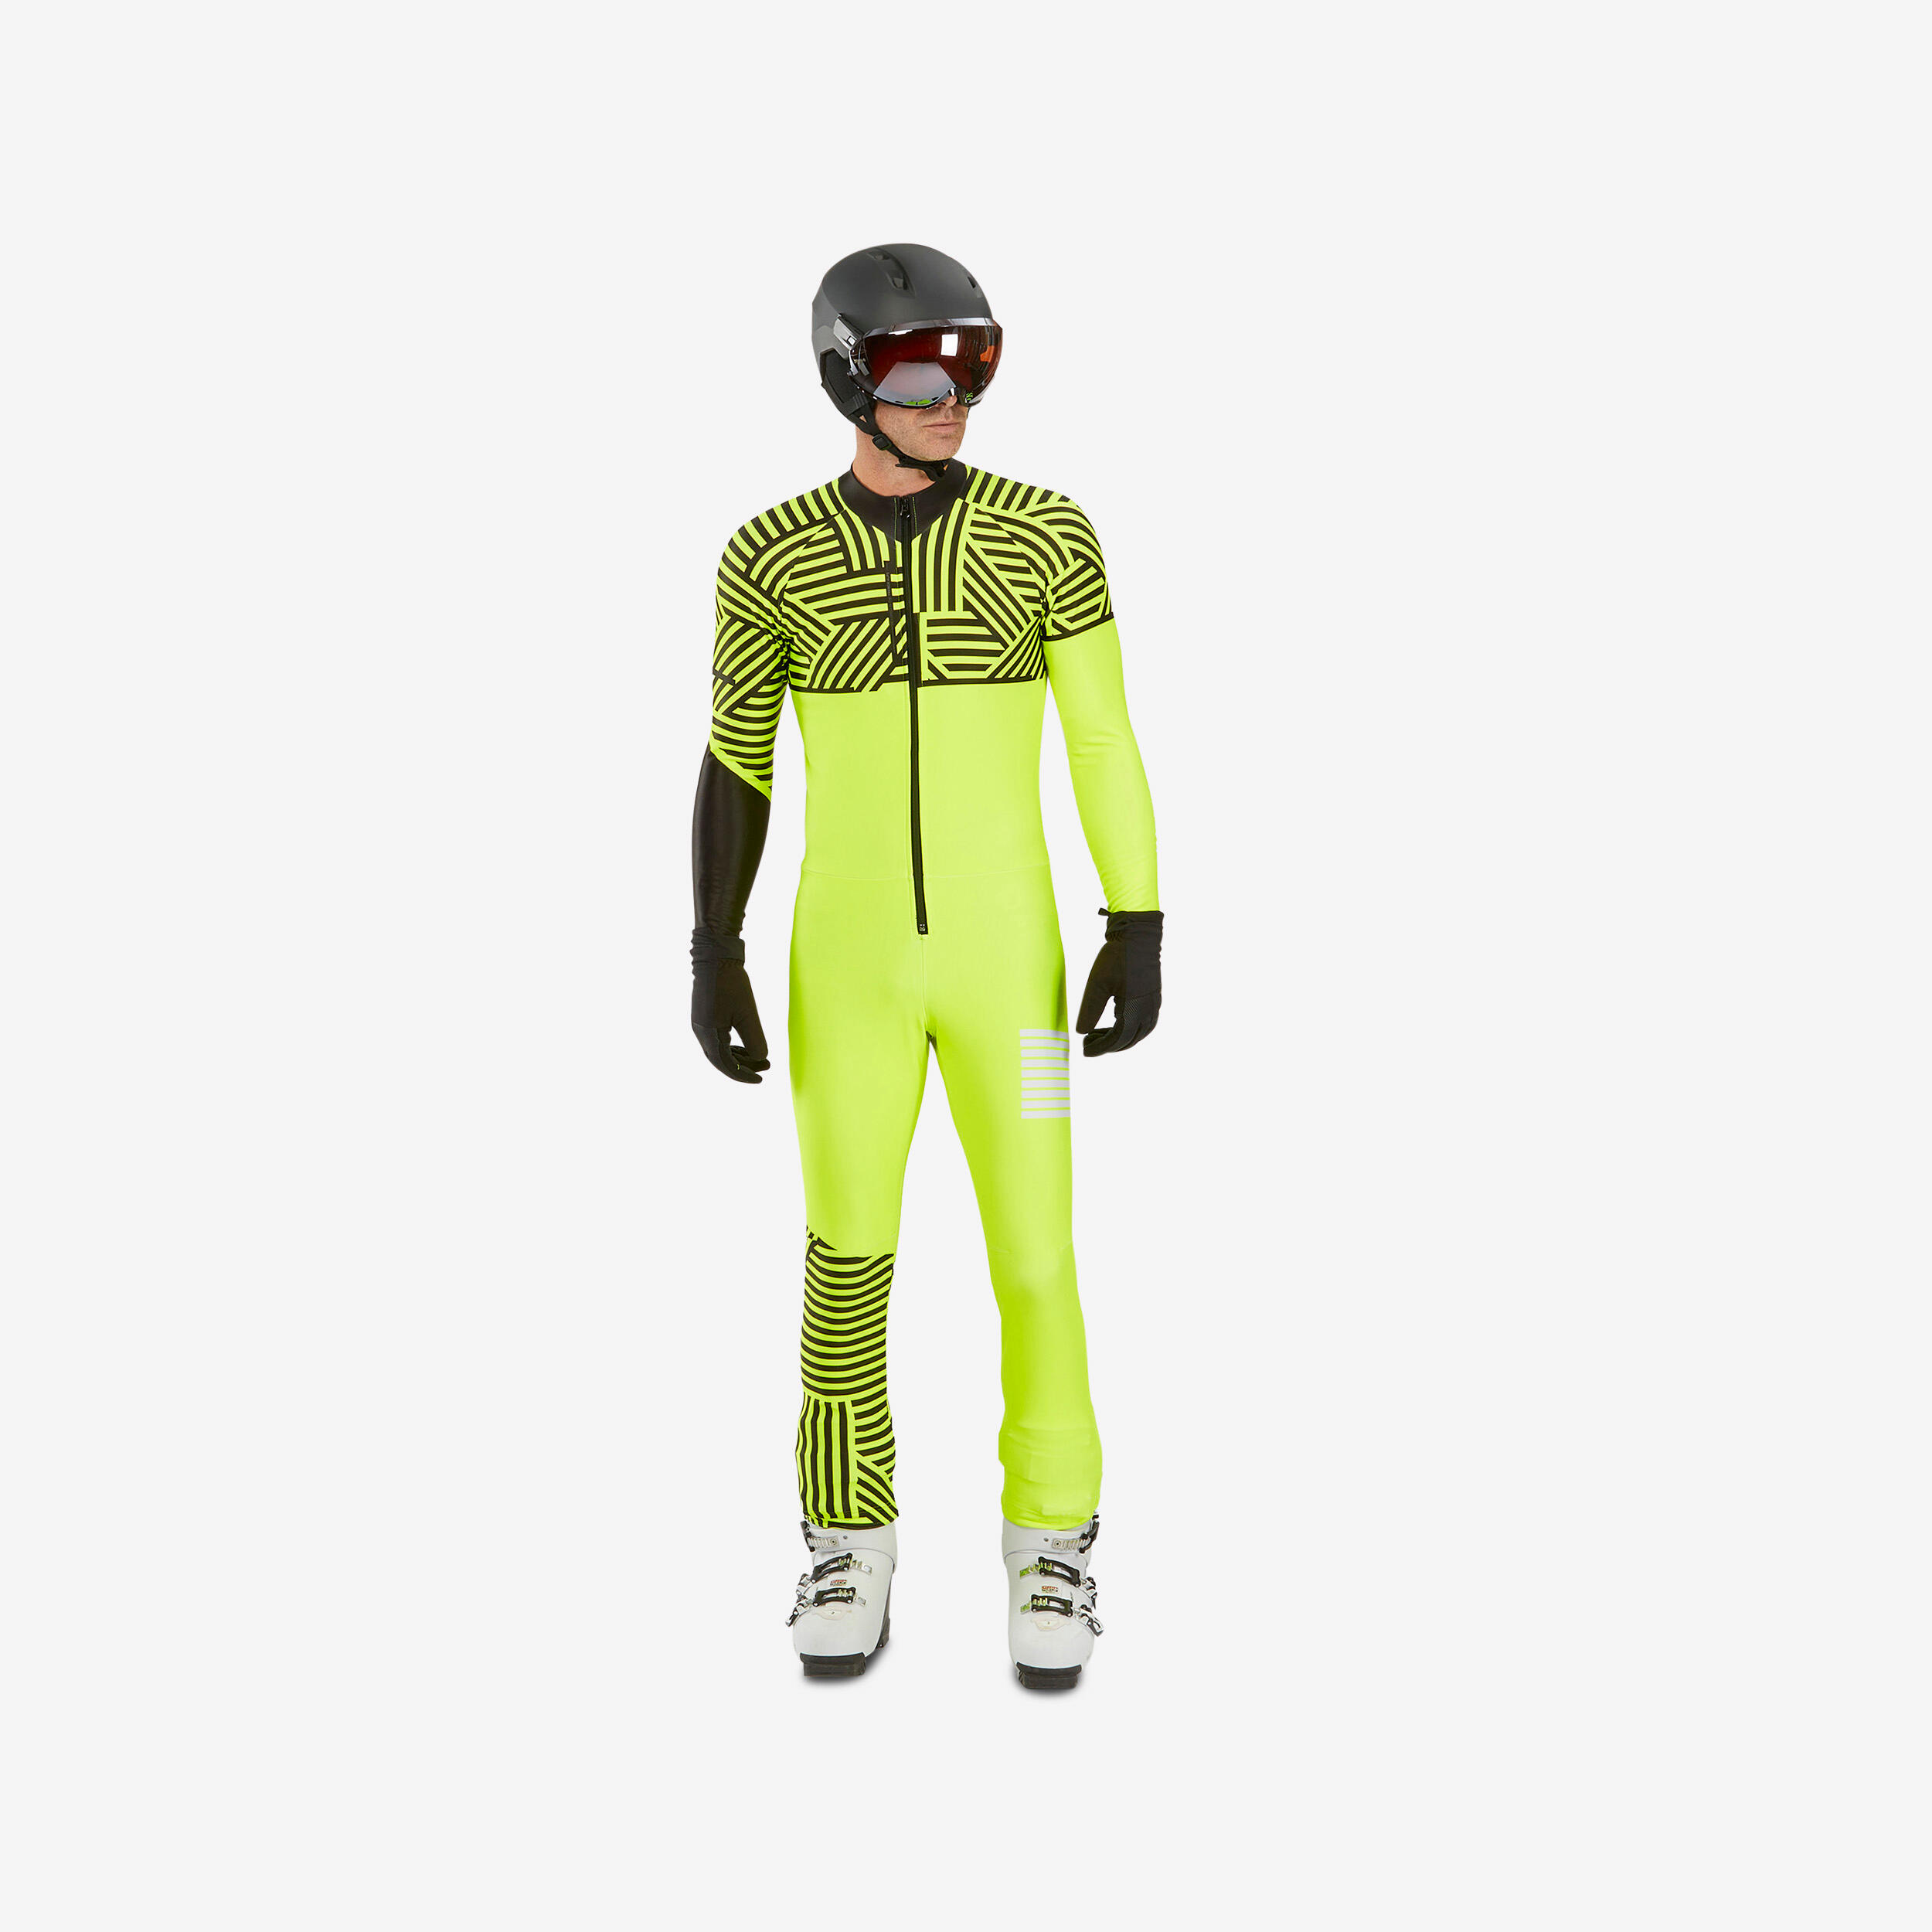 WEDZE ADULT COMPETITION SKI SUIT 980 - YELLOW